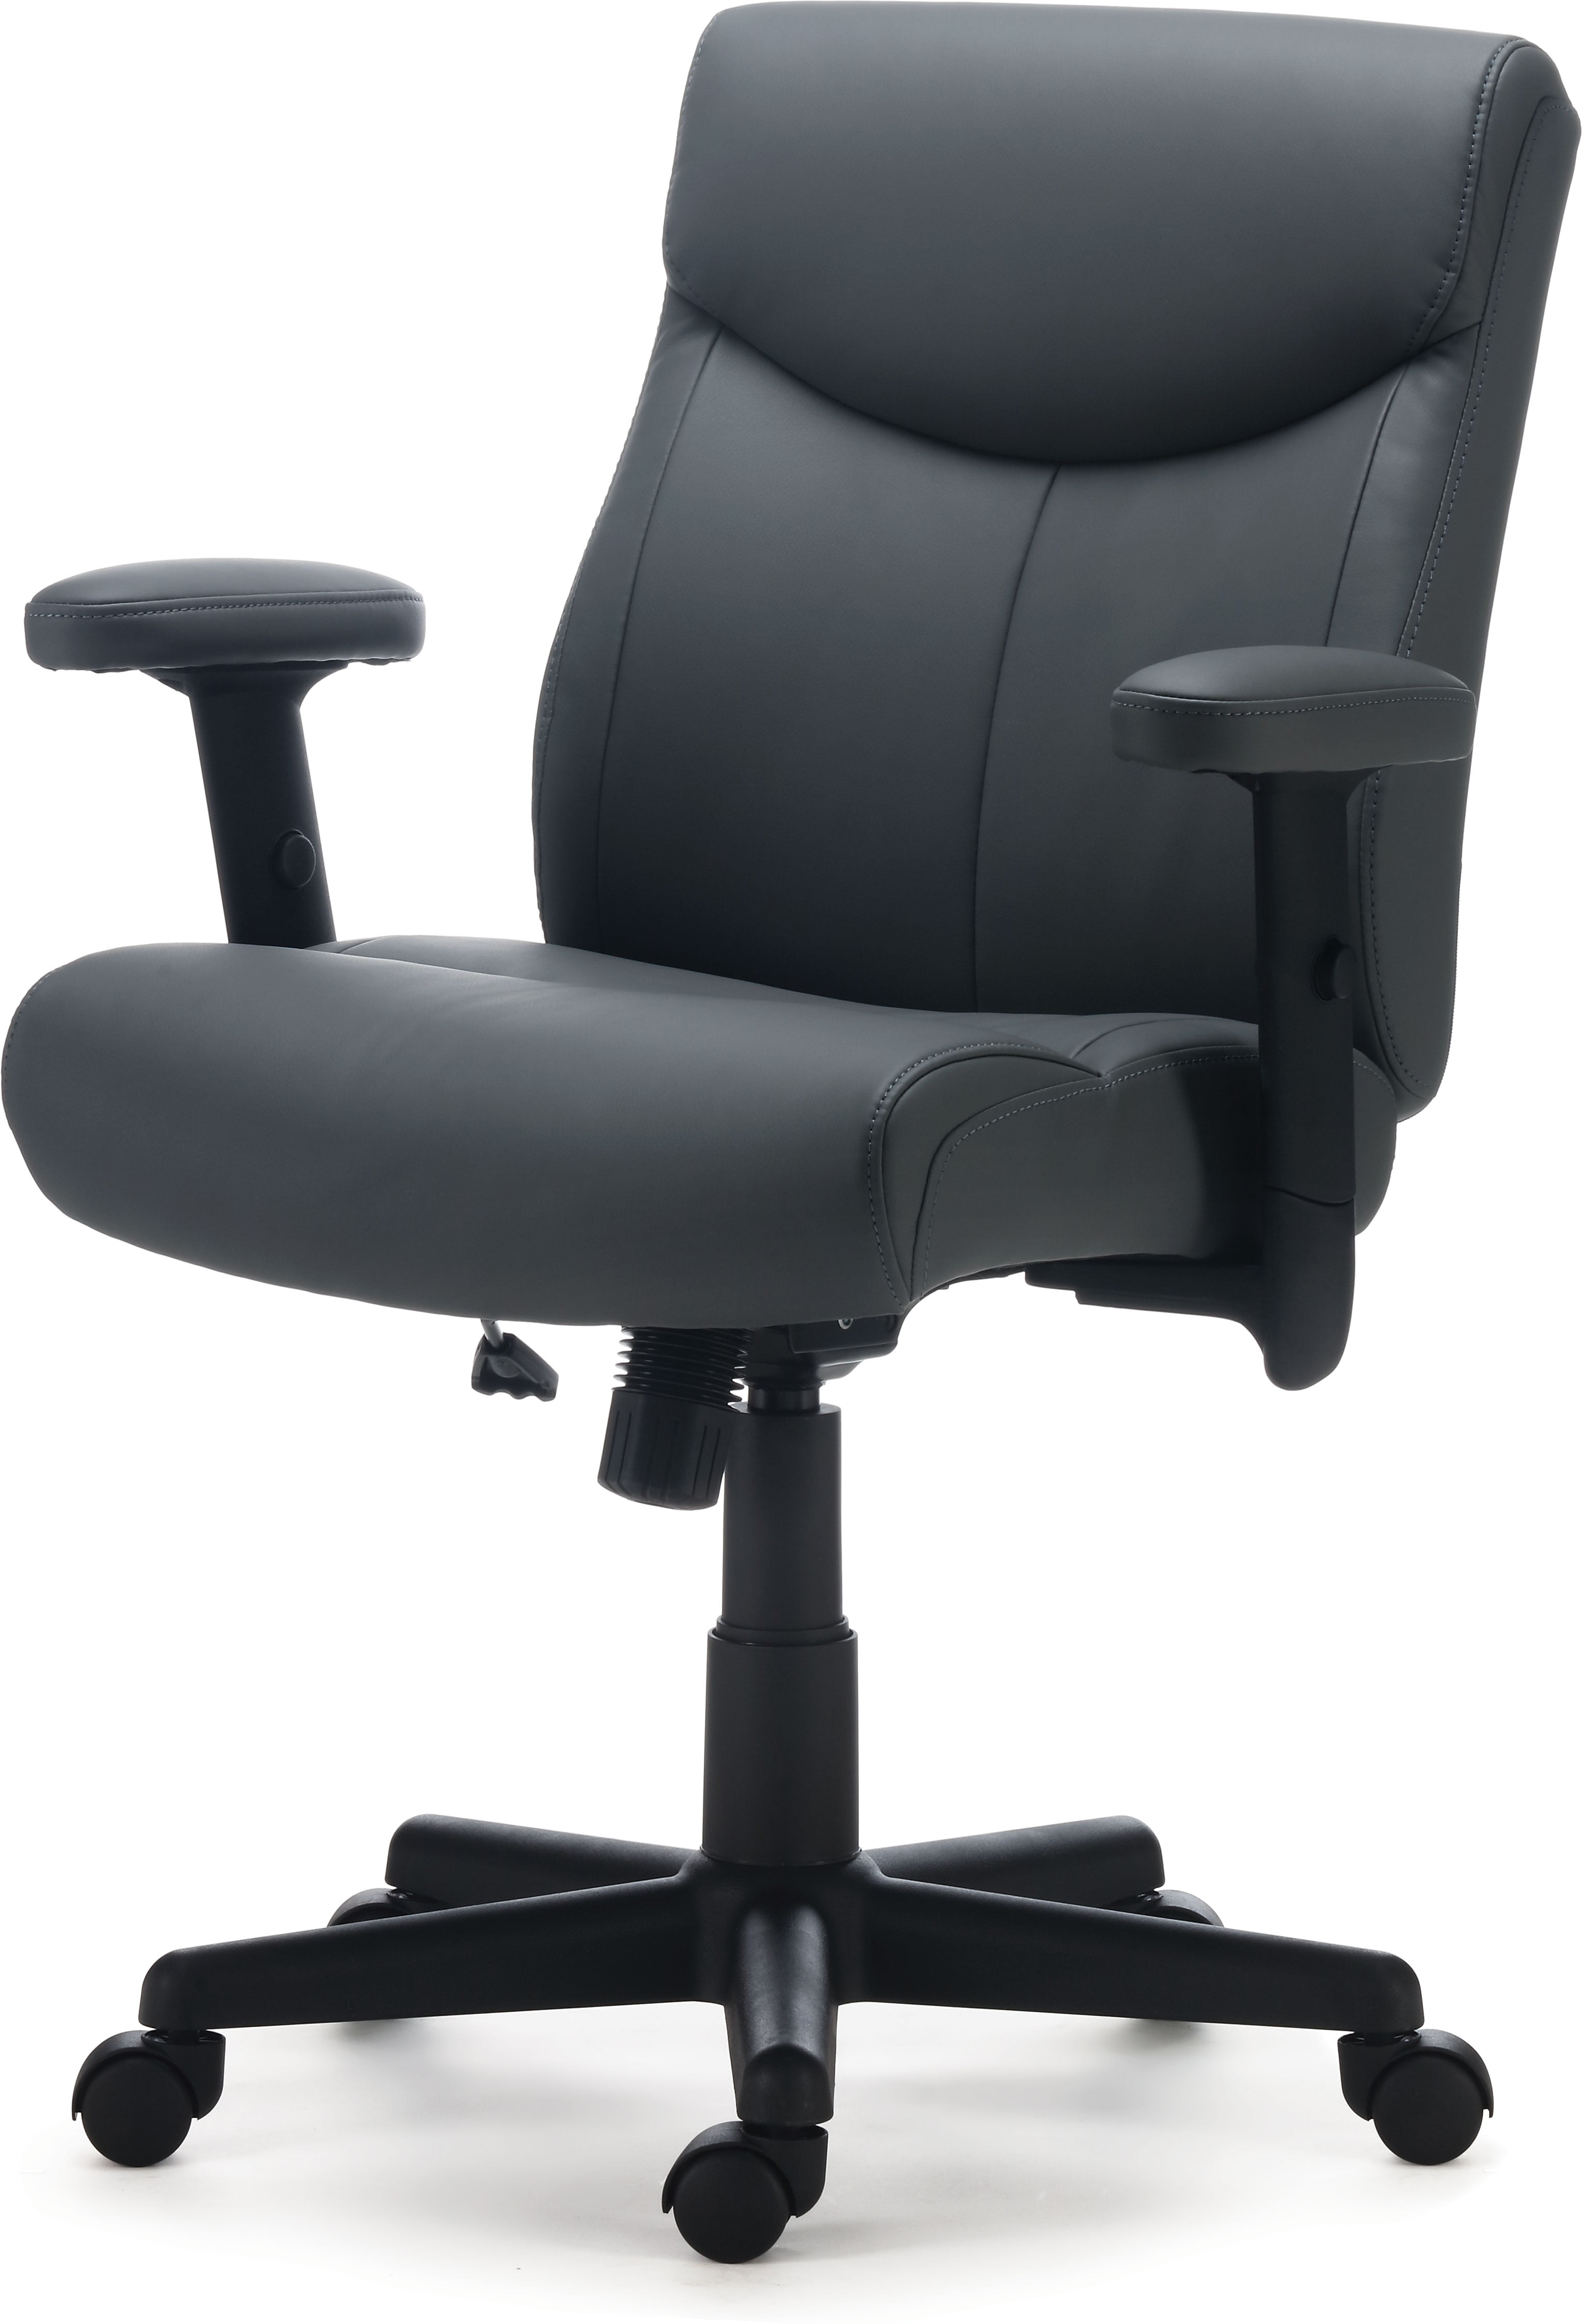 staples traymore luxura managers chair gray 53246 24328574  walmart